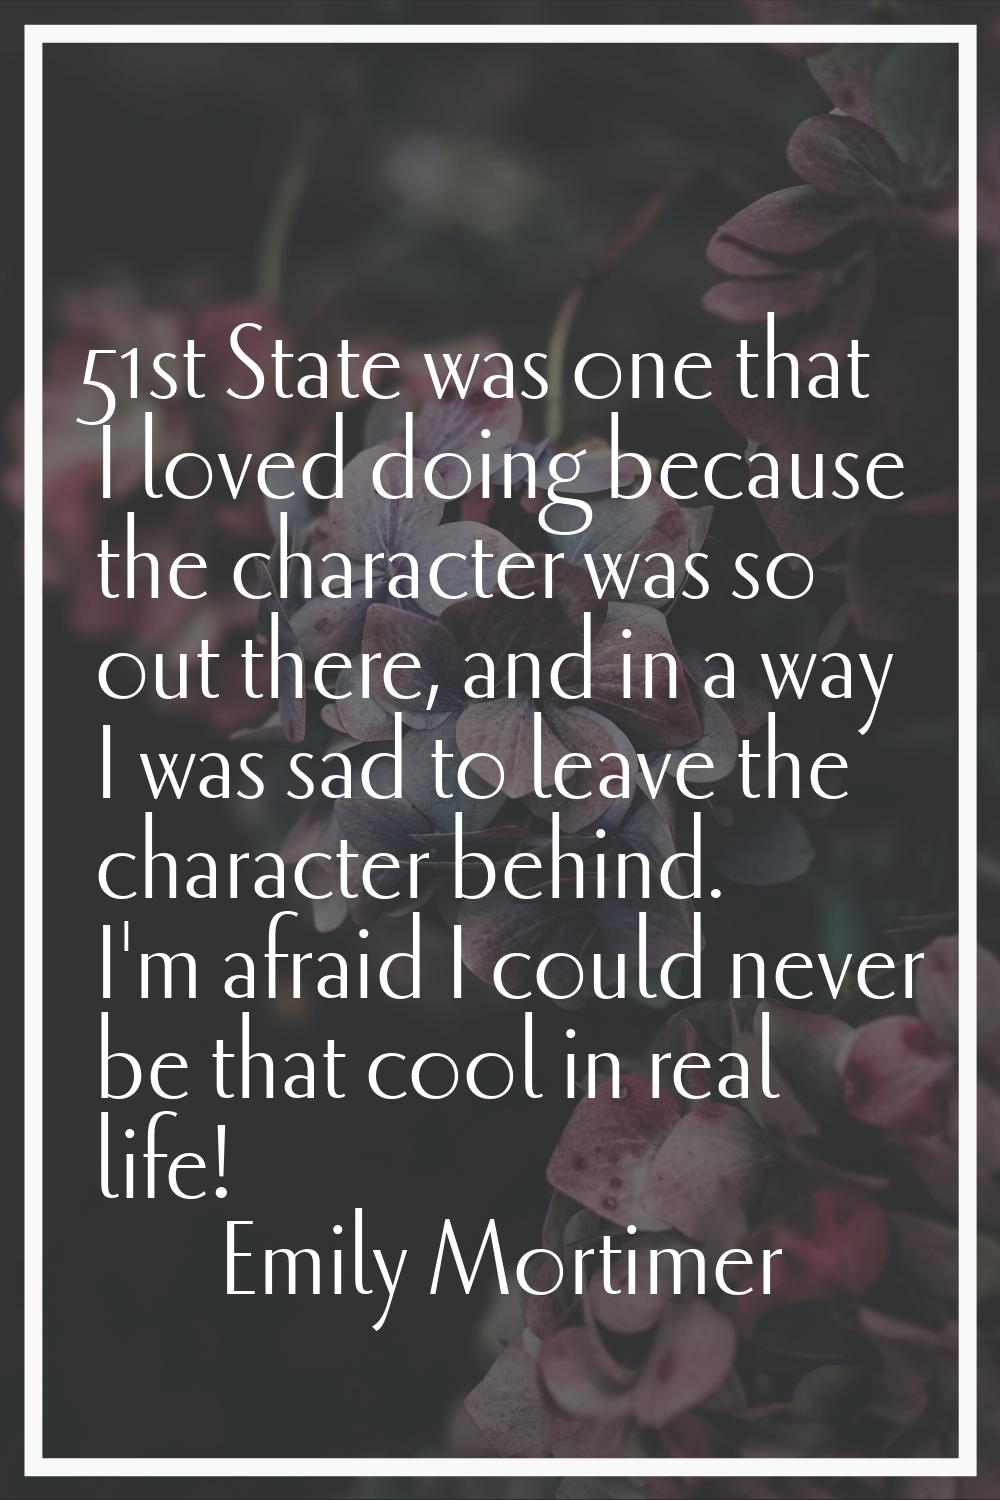 51st State was one that I loved doing because the character was so out there, and in a way I was sa